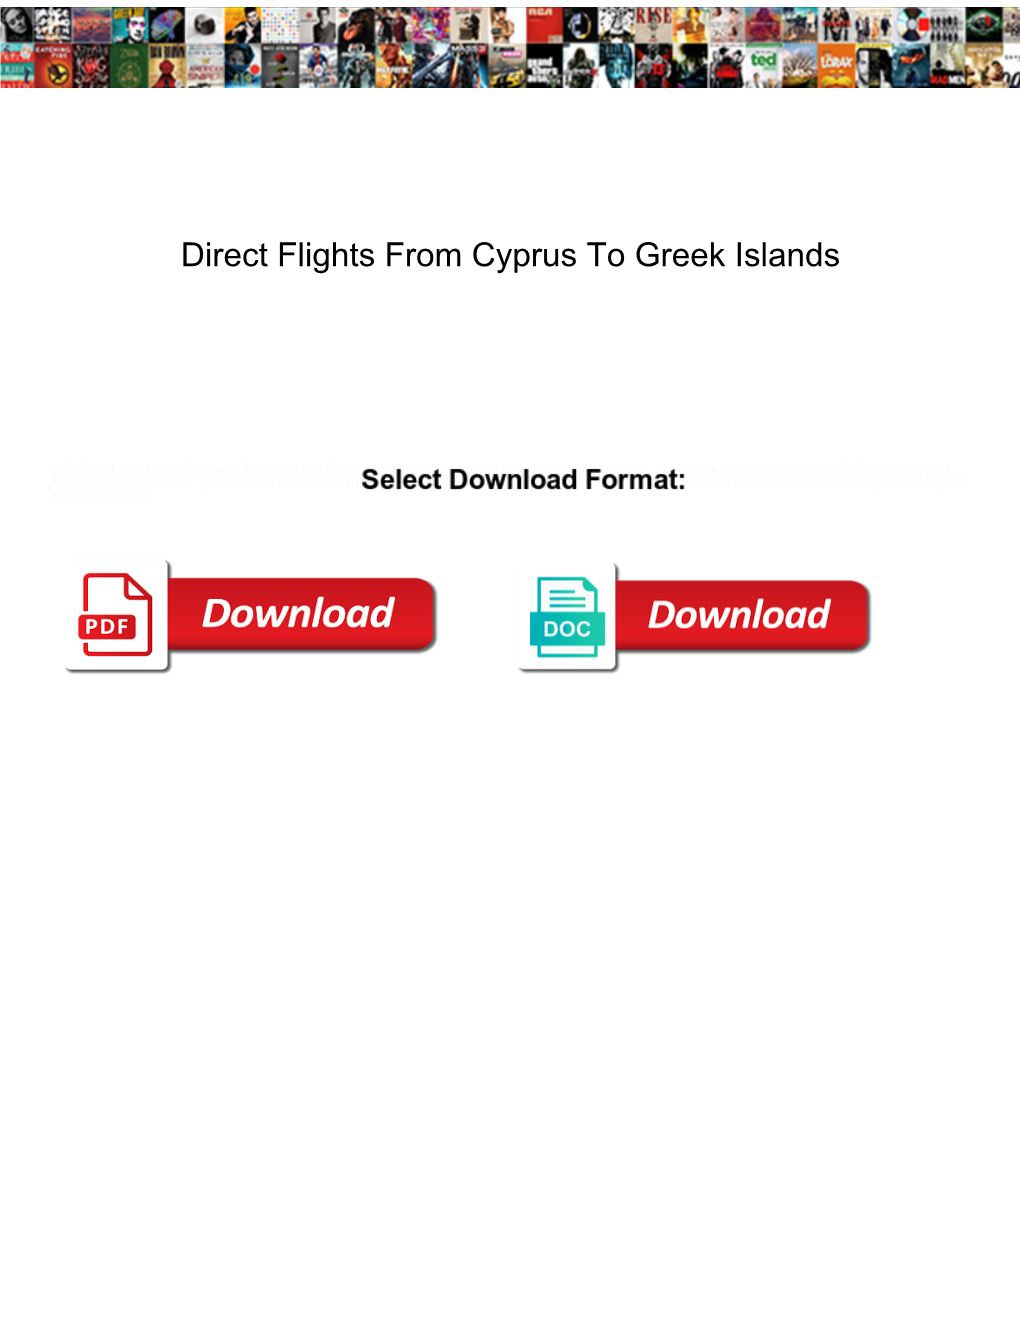 Direct Flights from Cyprus to Greek Islands